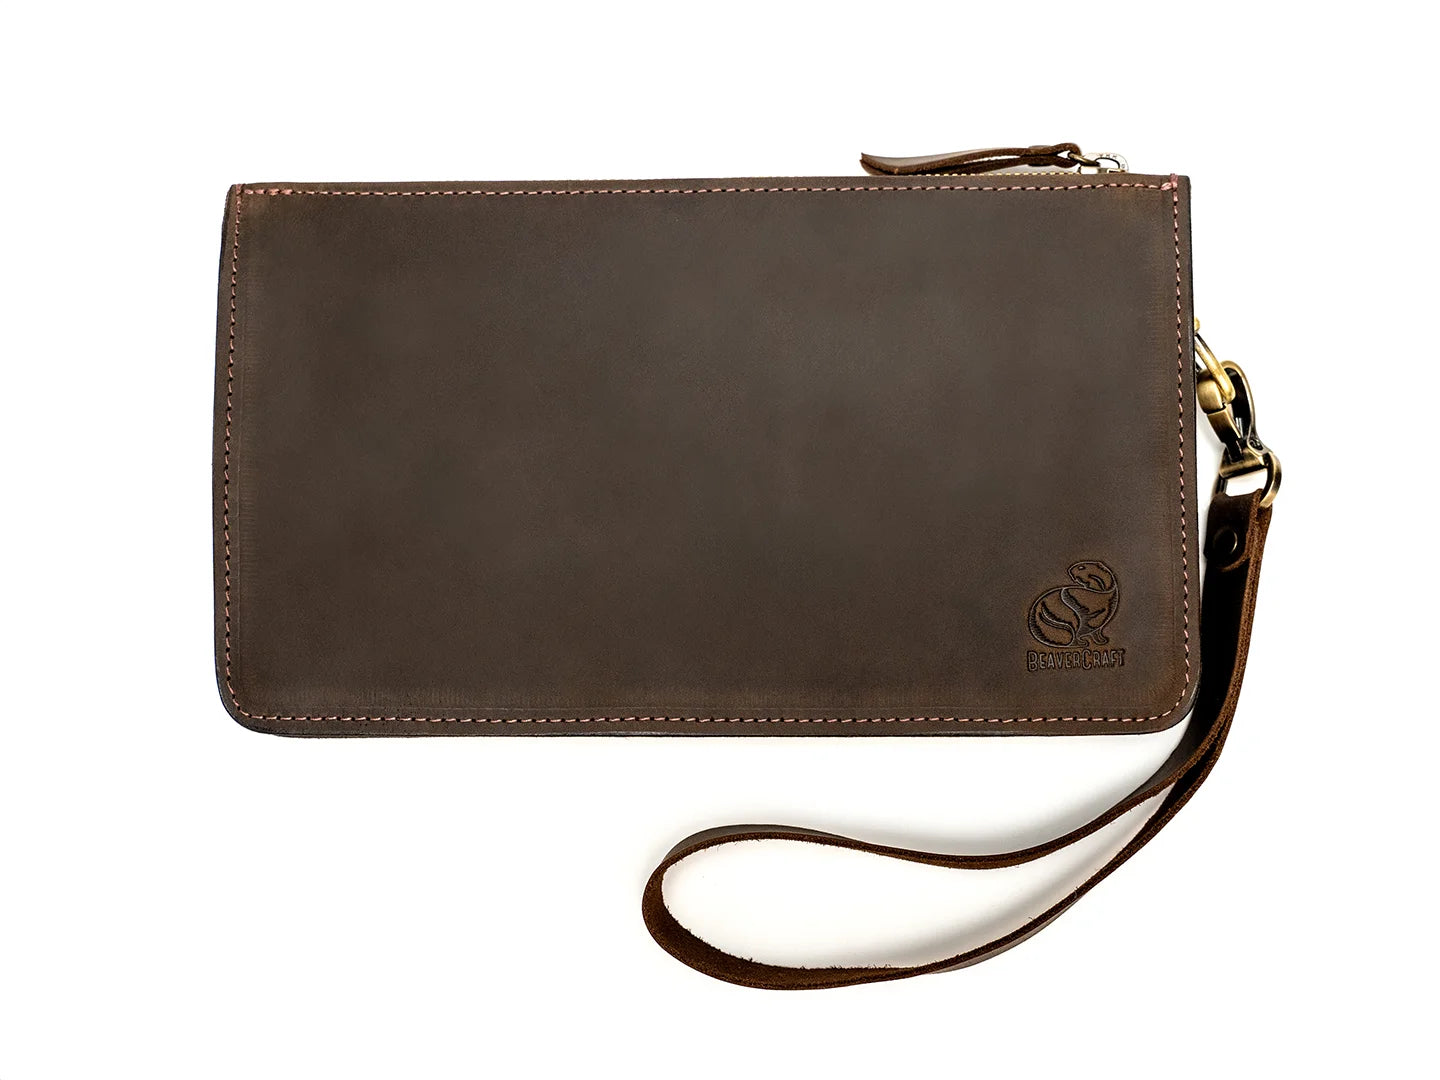 Mens Leather Clutch Bags